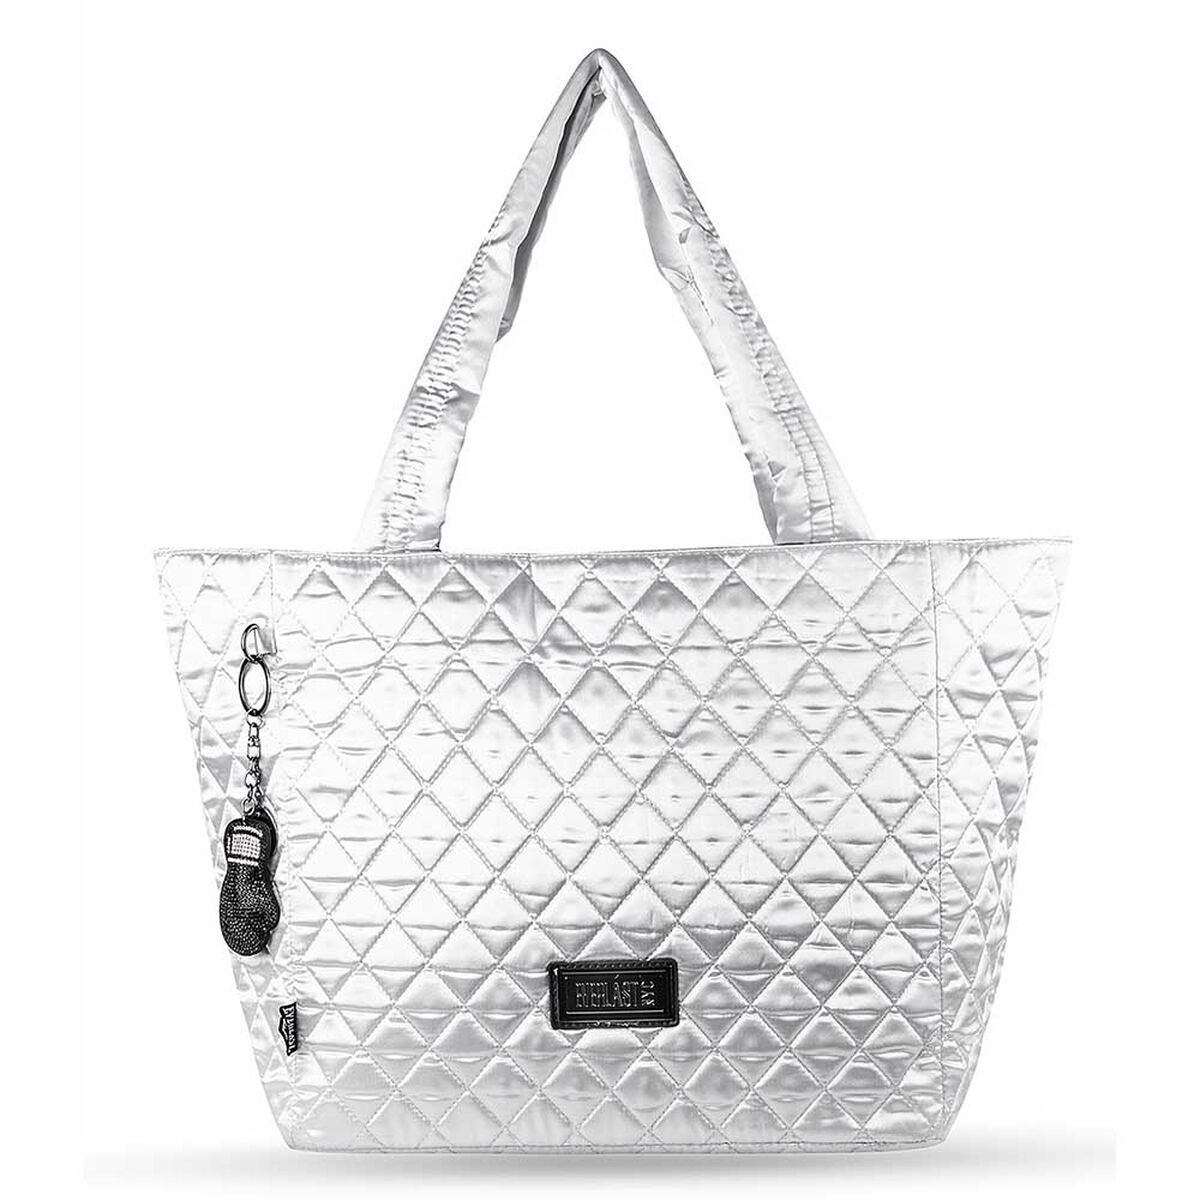 Bolso Everlast Tote Quilted Cosmic